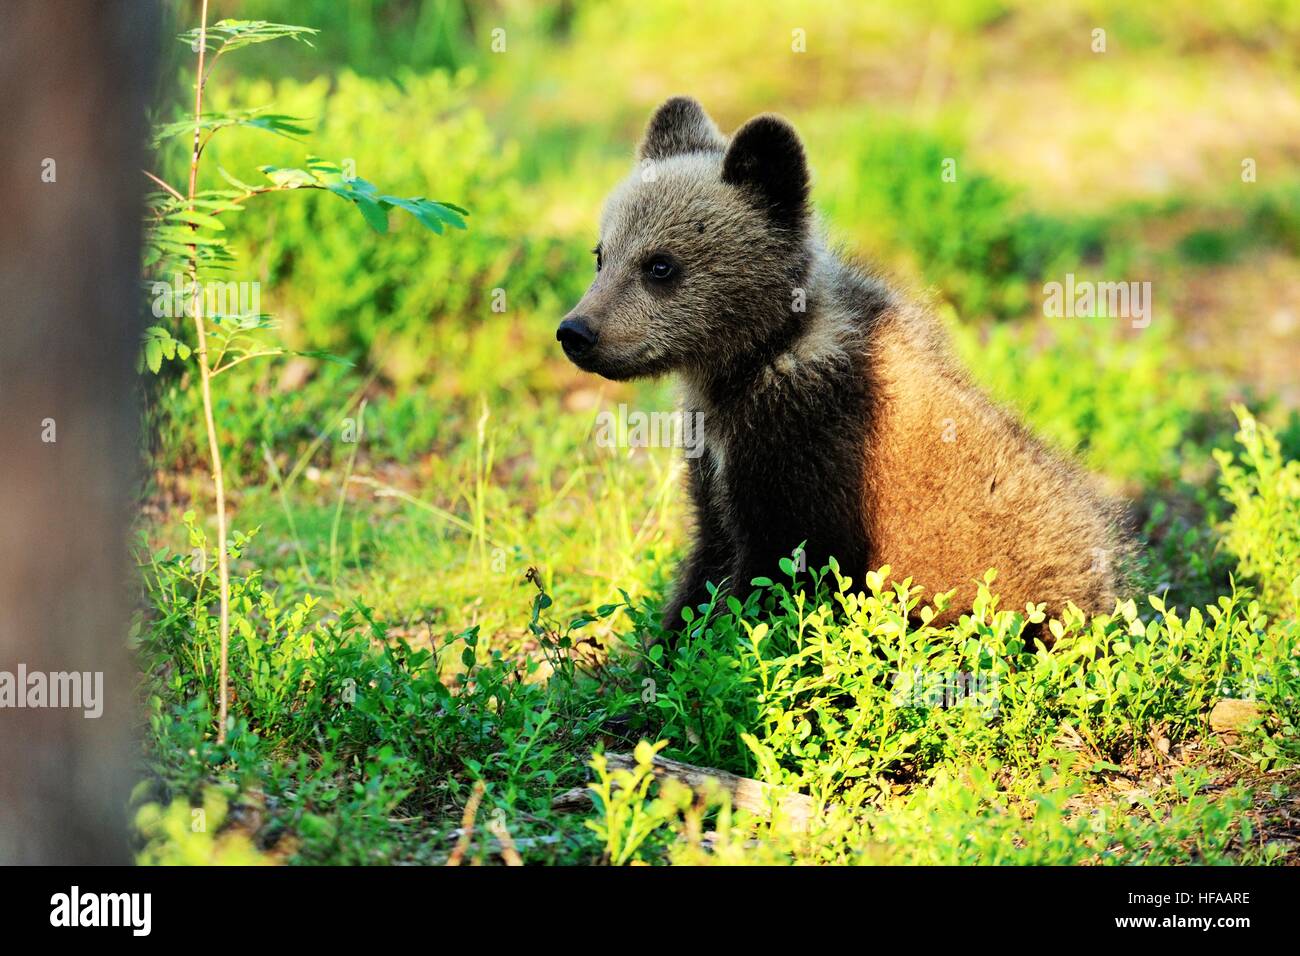 Brown bear cub in a forest Stock Photo